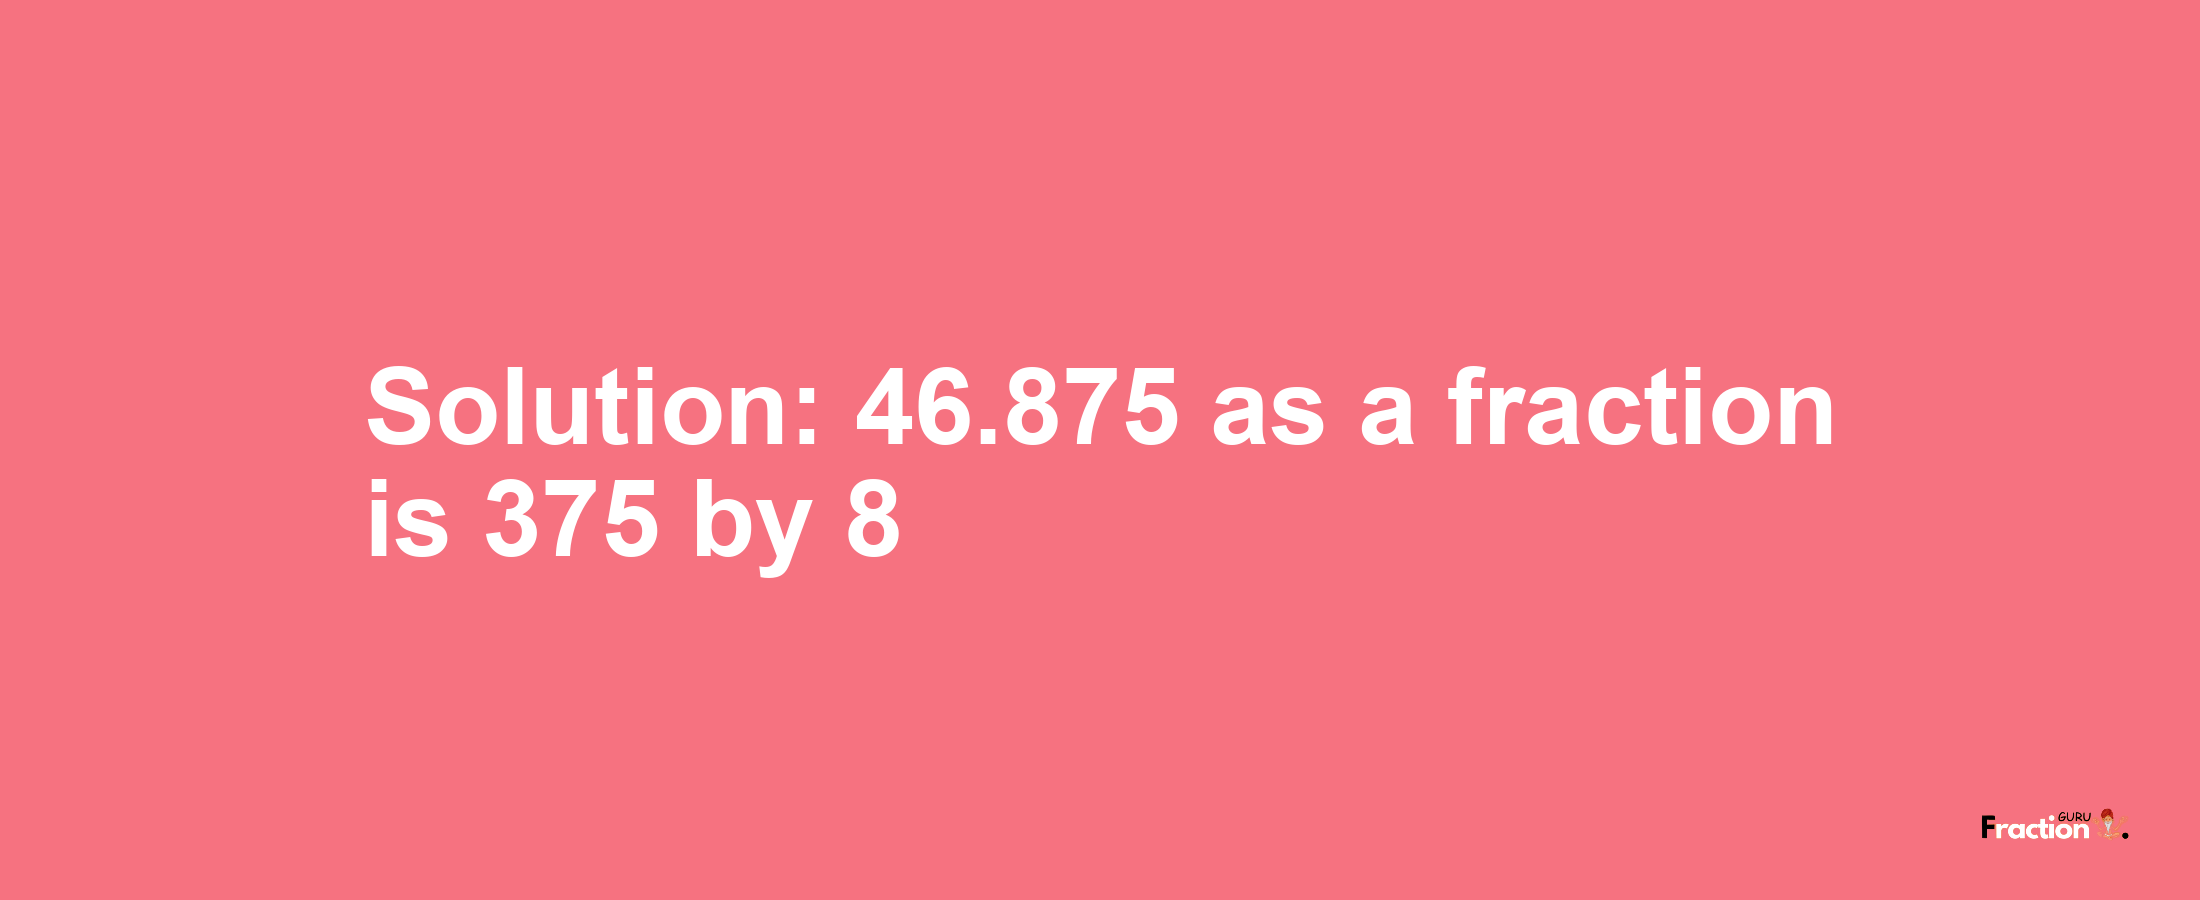 Solution:46.875 as a fraction is 375/8